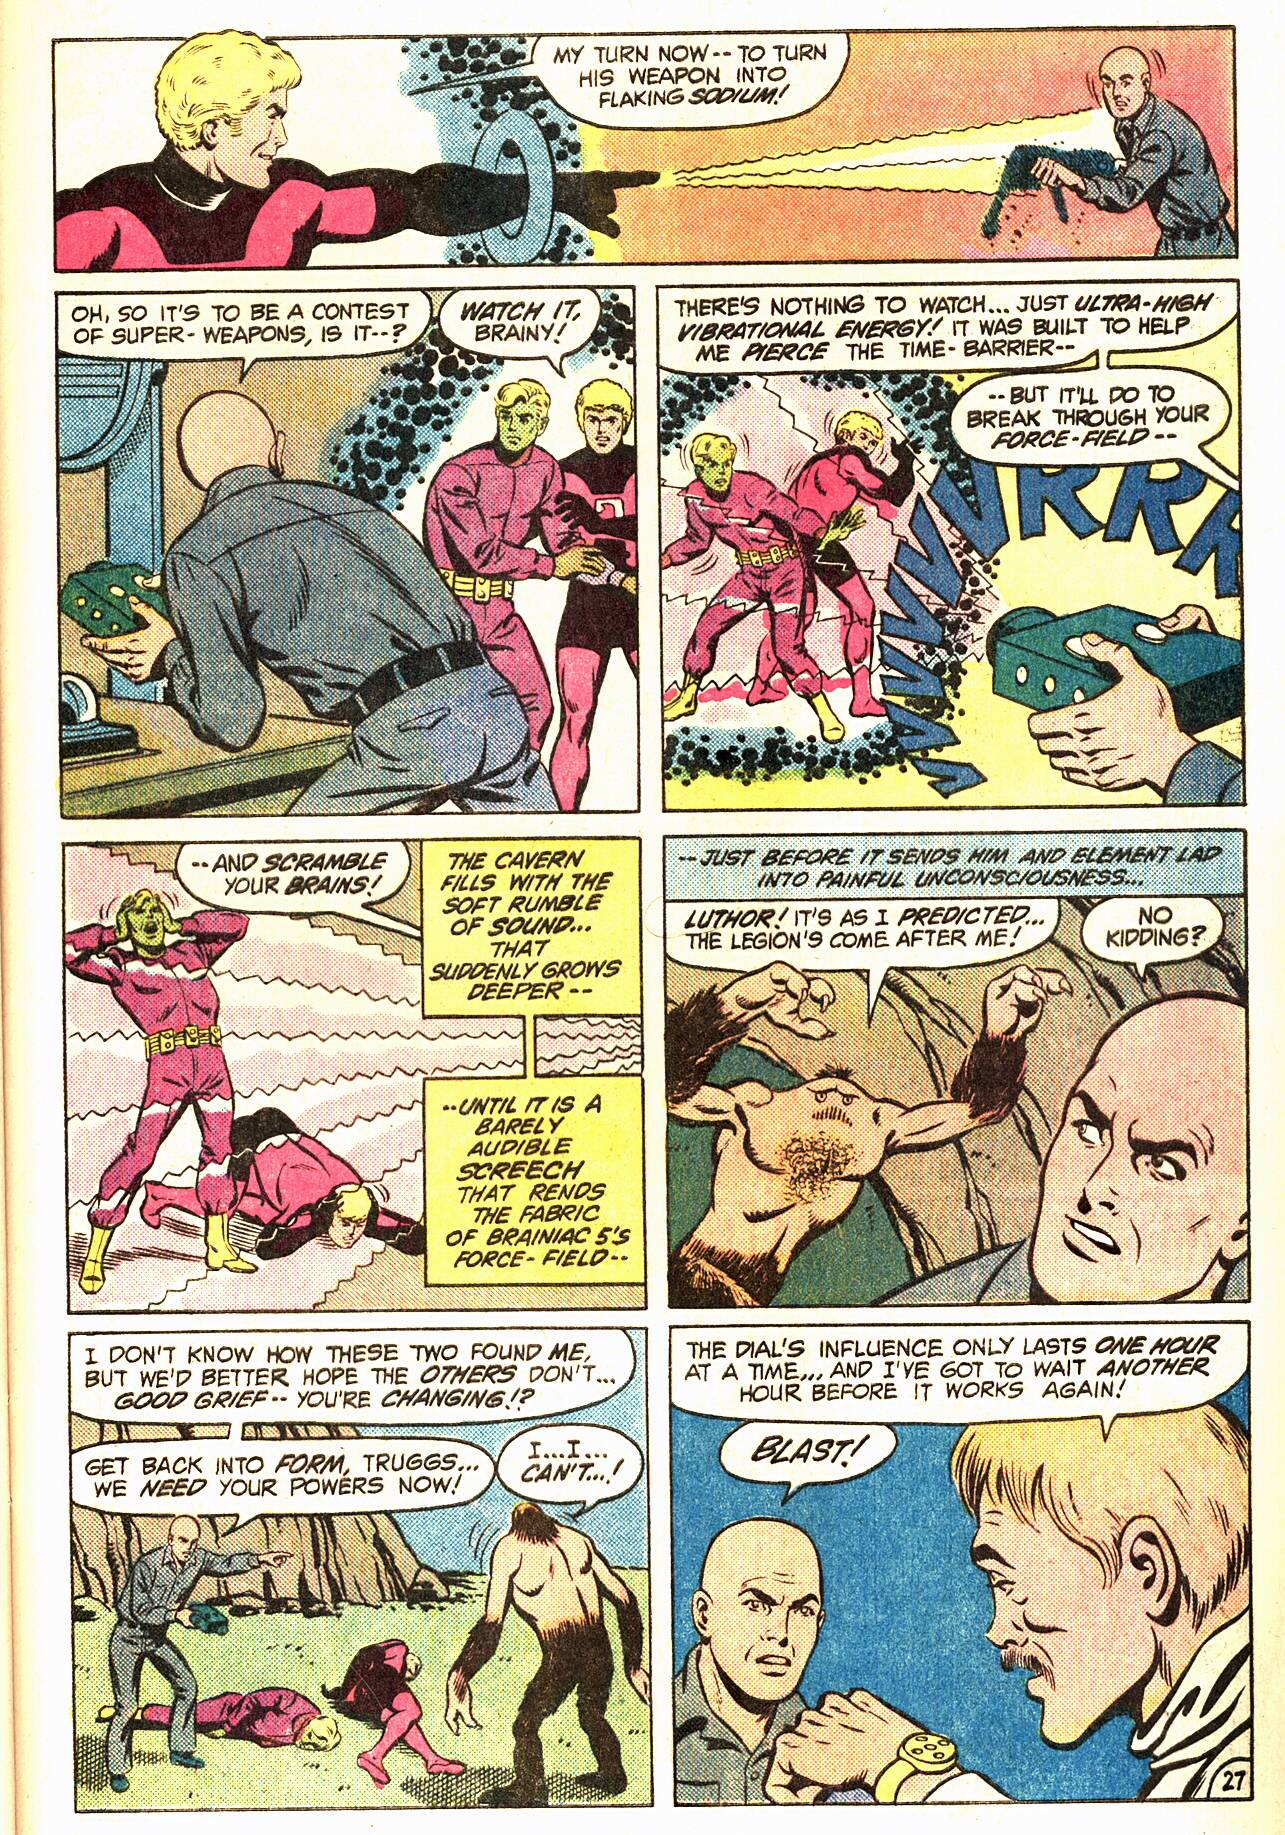 The New Adventures of Superboy 50 Page 27